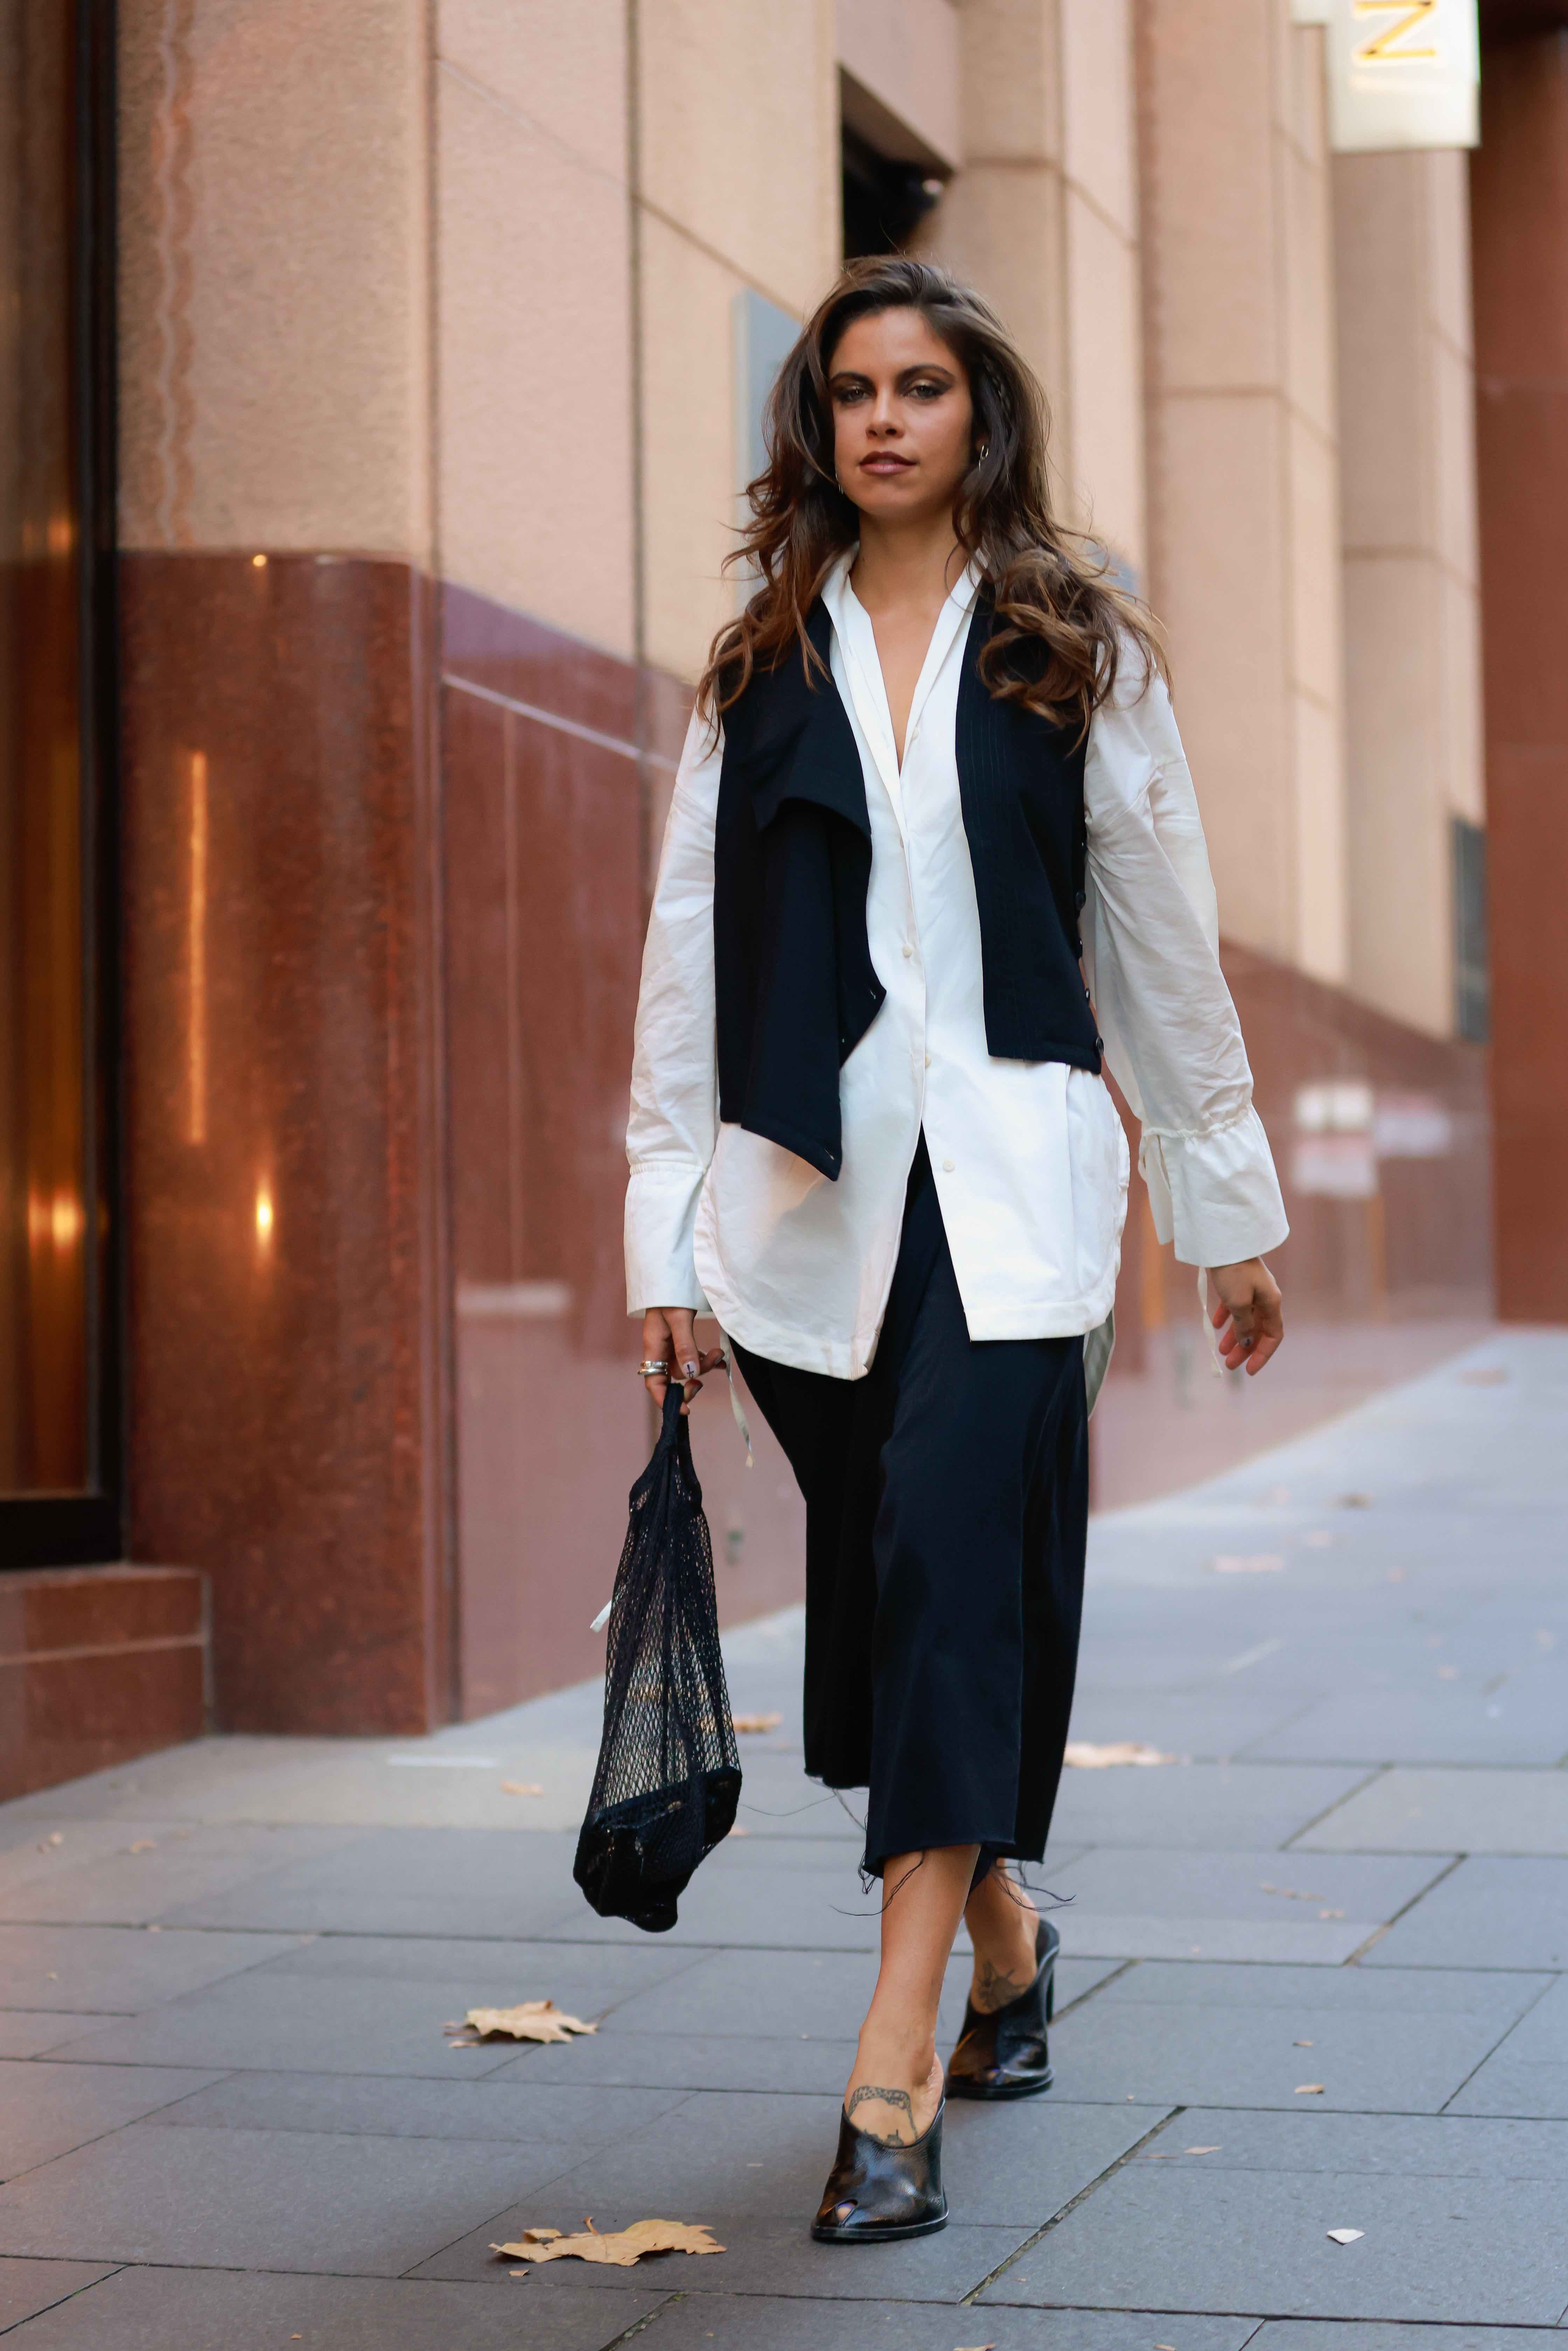 30 Days of Outfit Ideas: Personal Style + Black Blazer+ Black